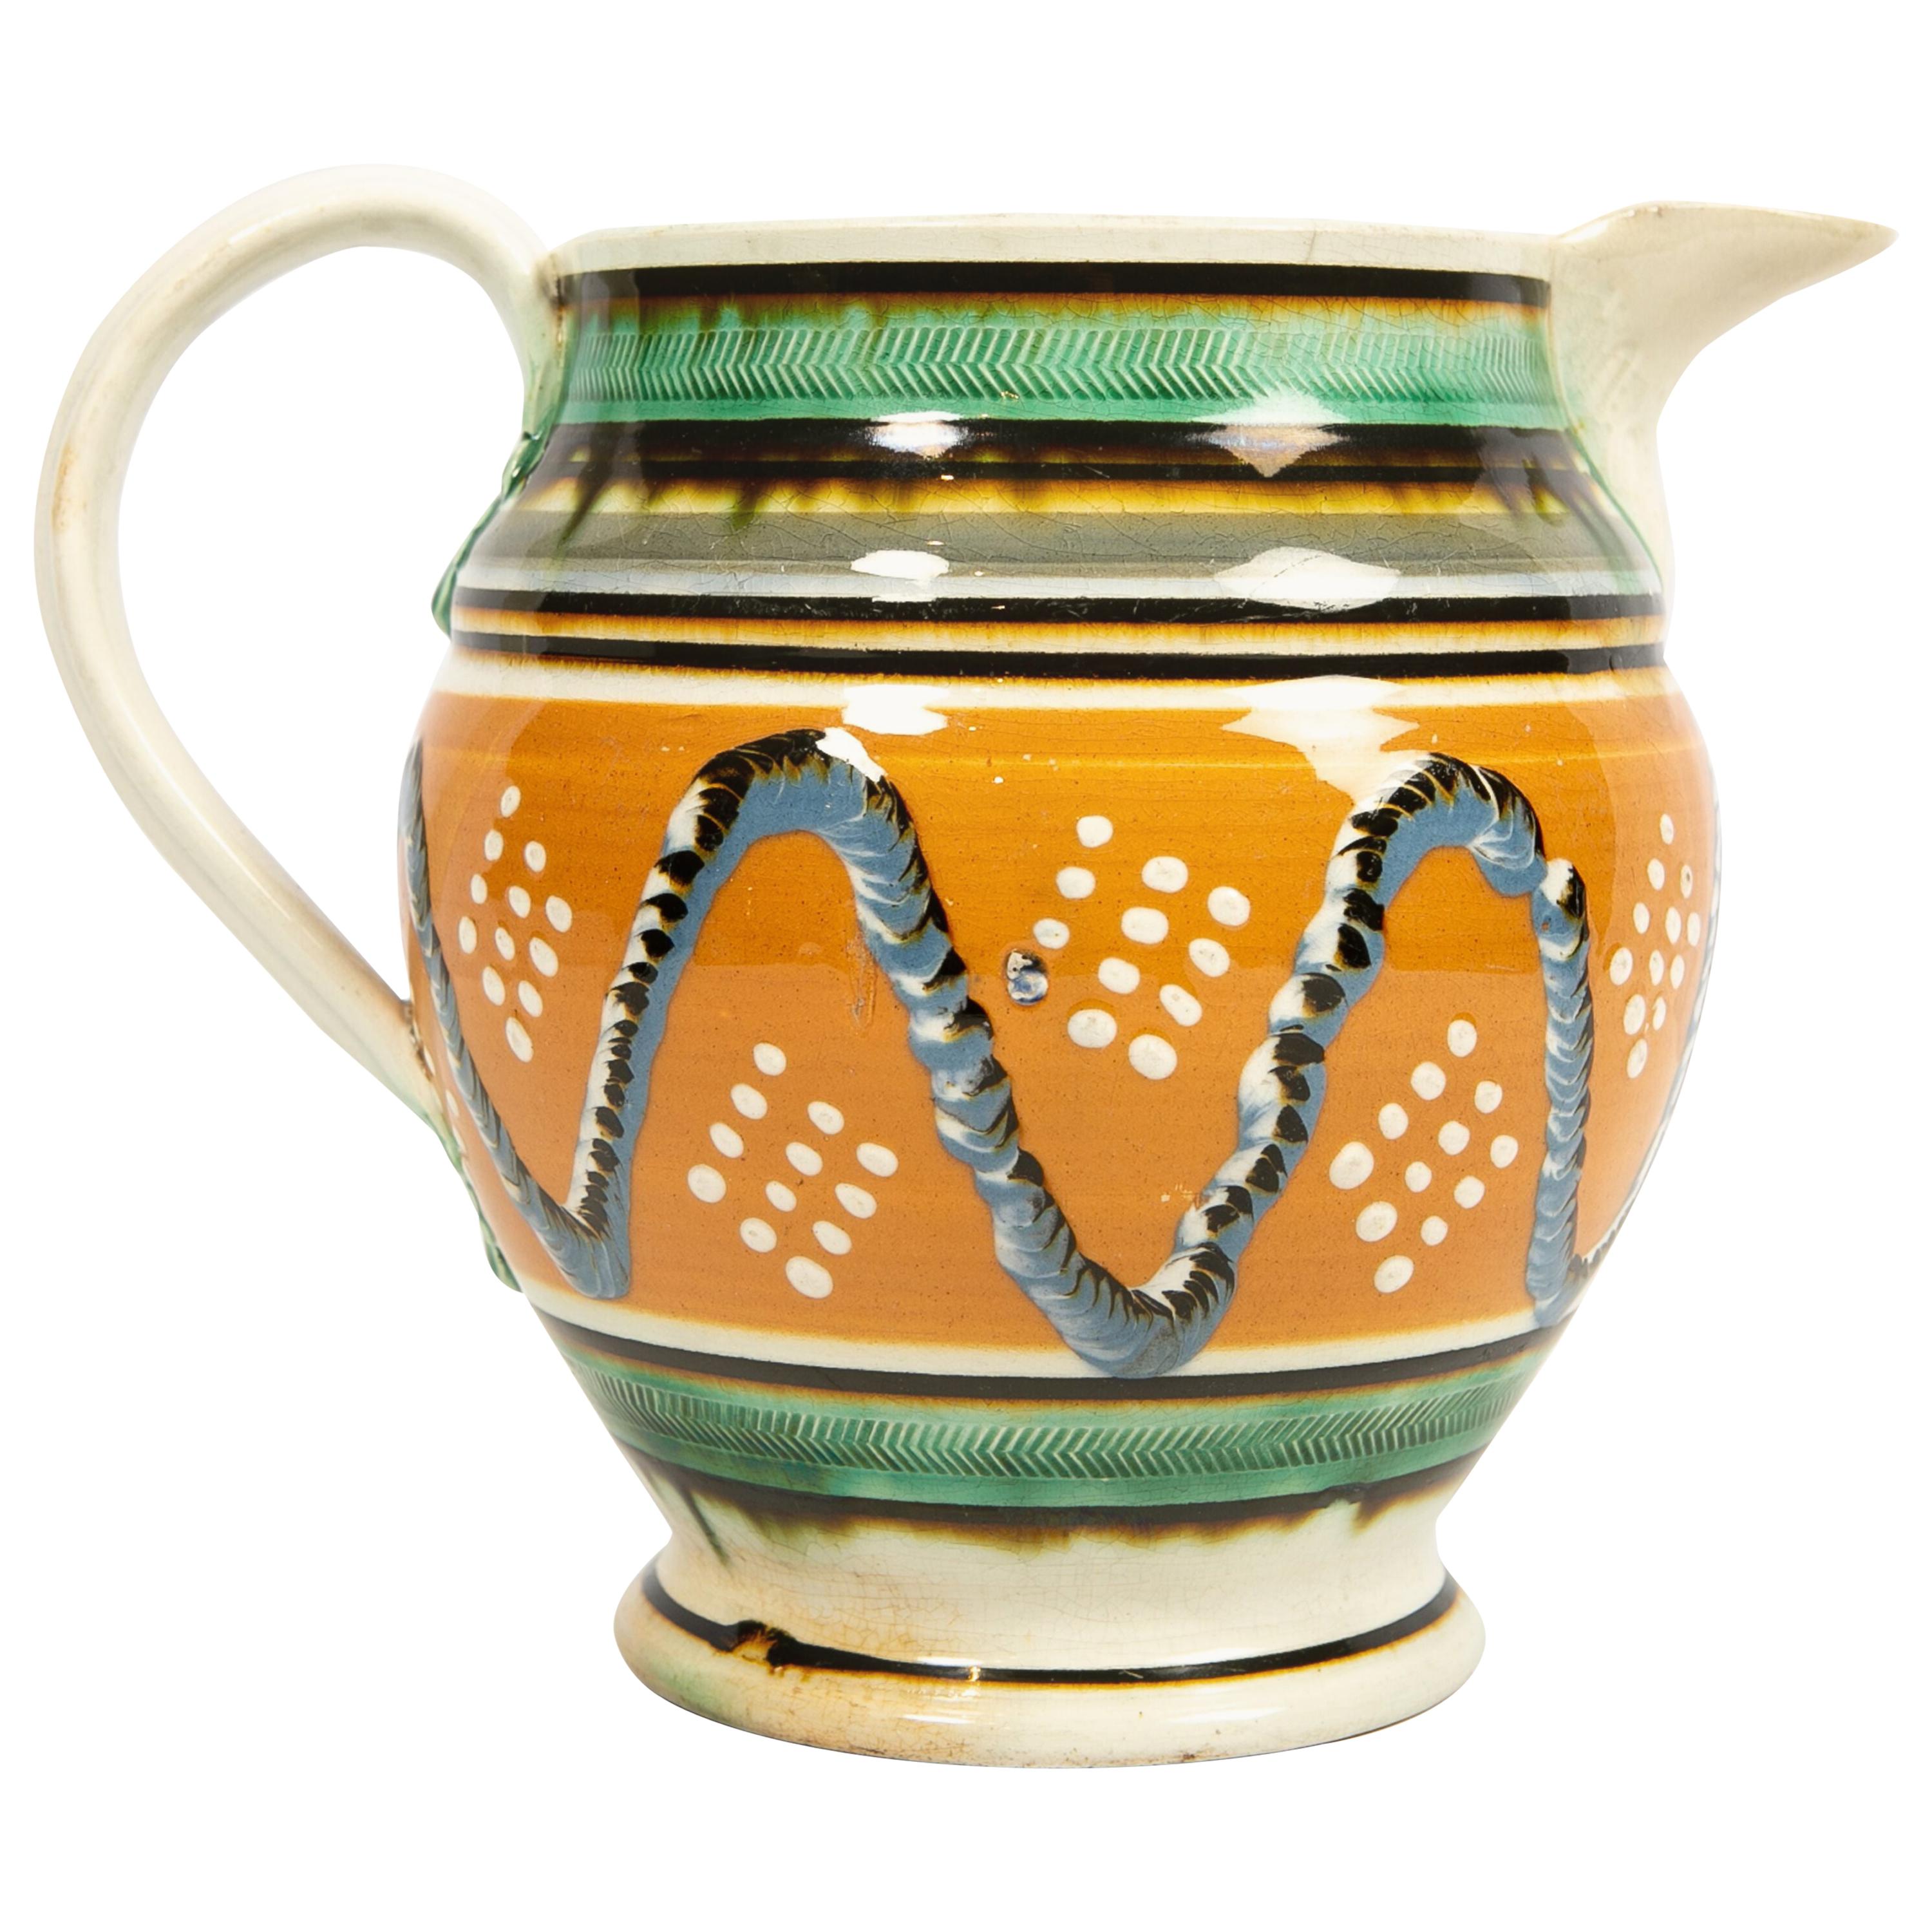 Creamware Mochaware Pitcher Decorated with Cable and Dot Decoration, England